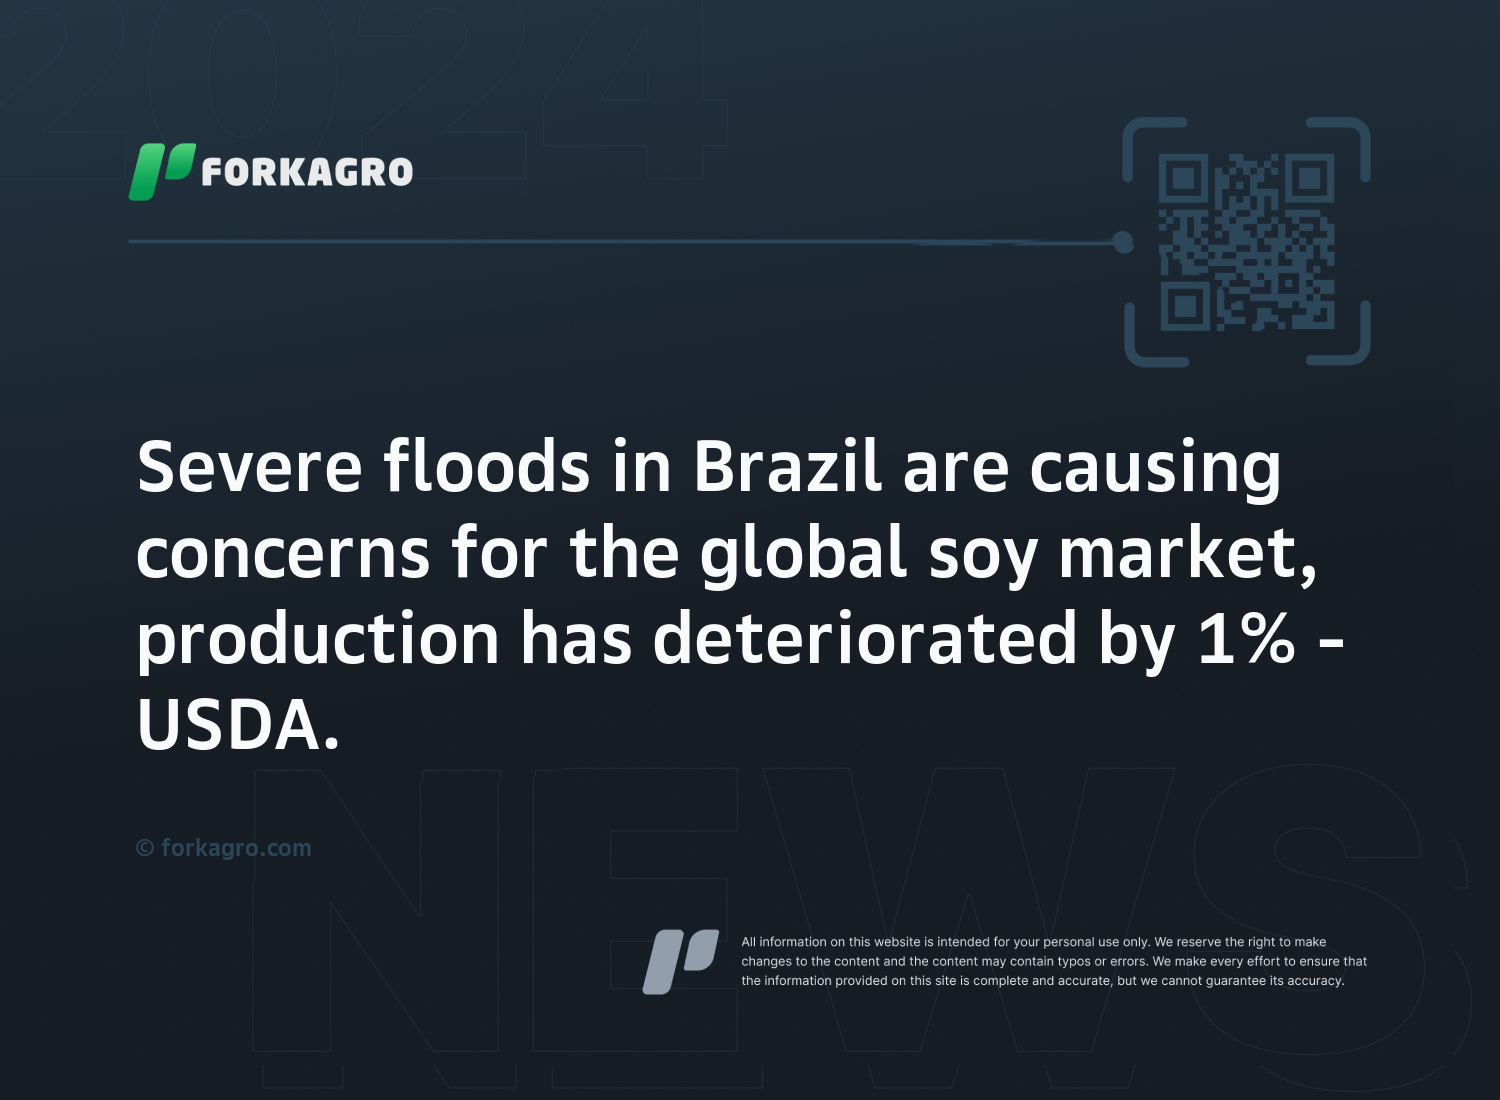 Severe floods in Brazil are causing concerns for the global soy market, production has deteriorated by 1% - USDA.